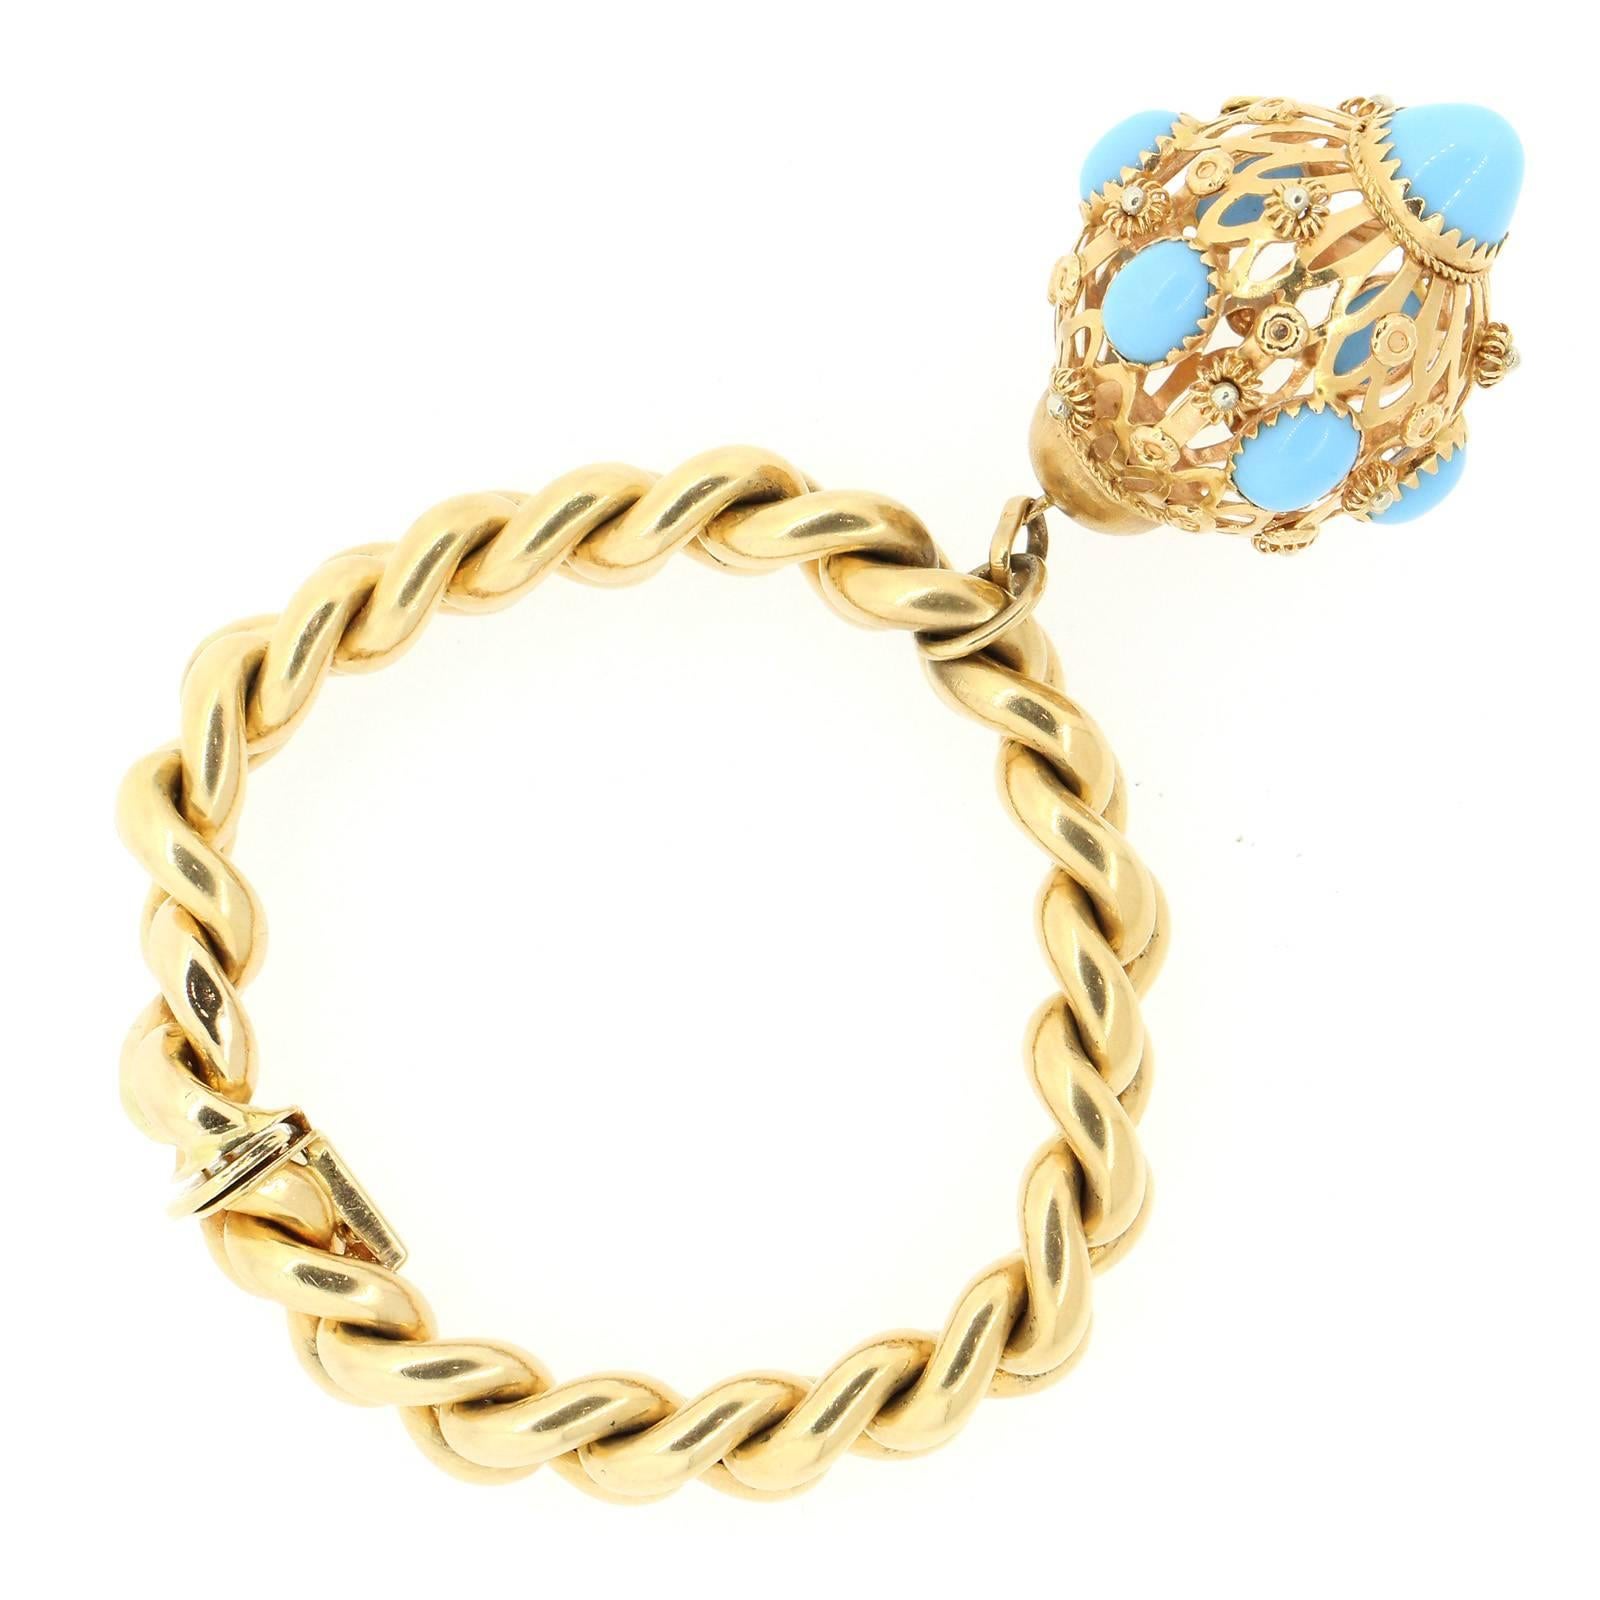 A playful 18KT yellow gold bracelet featuring an open work pomander like 18KT charm bezel set with seven cabochon cut blue stones.  The bracelet is seven inches long and is marked with Italian hallmarks.  Circa 1960s